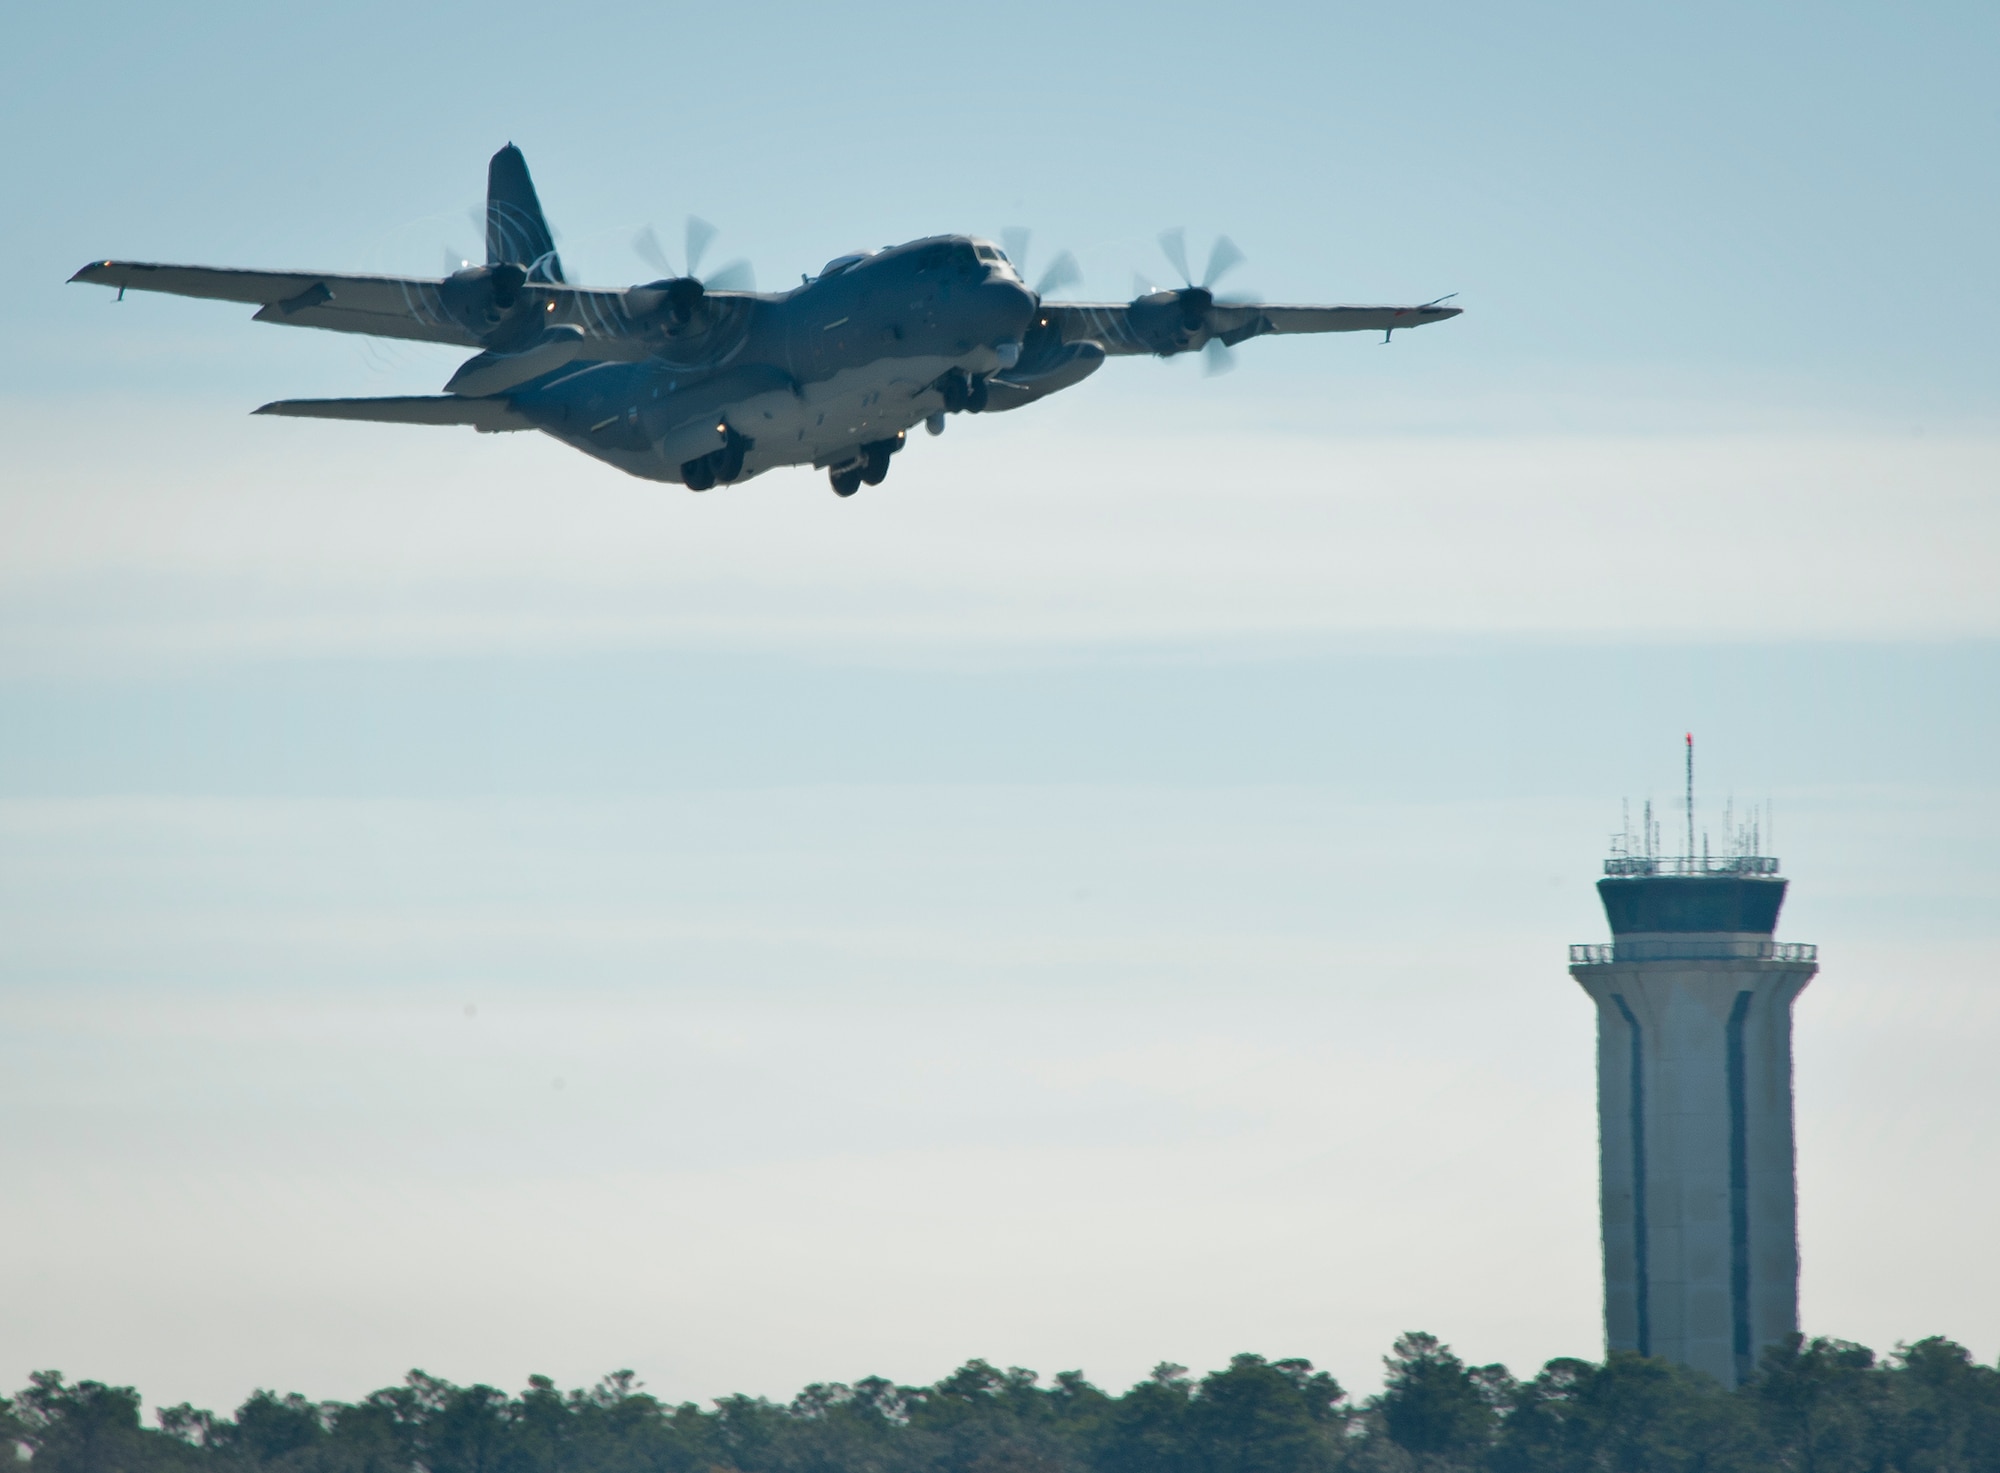 The newly created AC-130J Ghostrider takes to the air during its first official sortie Jan. 31 at Eglin Air Force Base, Fla. The Air Force Special Operations Command MC-130J arrived at Eglin in January 2013 to begin the modification process for the AC-130J, whose primary mission is close air support, air interdiction and armed reconnaissance. A total of 32 MC-130J prototypes will be modified as part of a $2.4 billion AC-130J program to grow the future fleet. (U.S. Air Force photo/Sara Vidoni) 